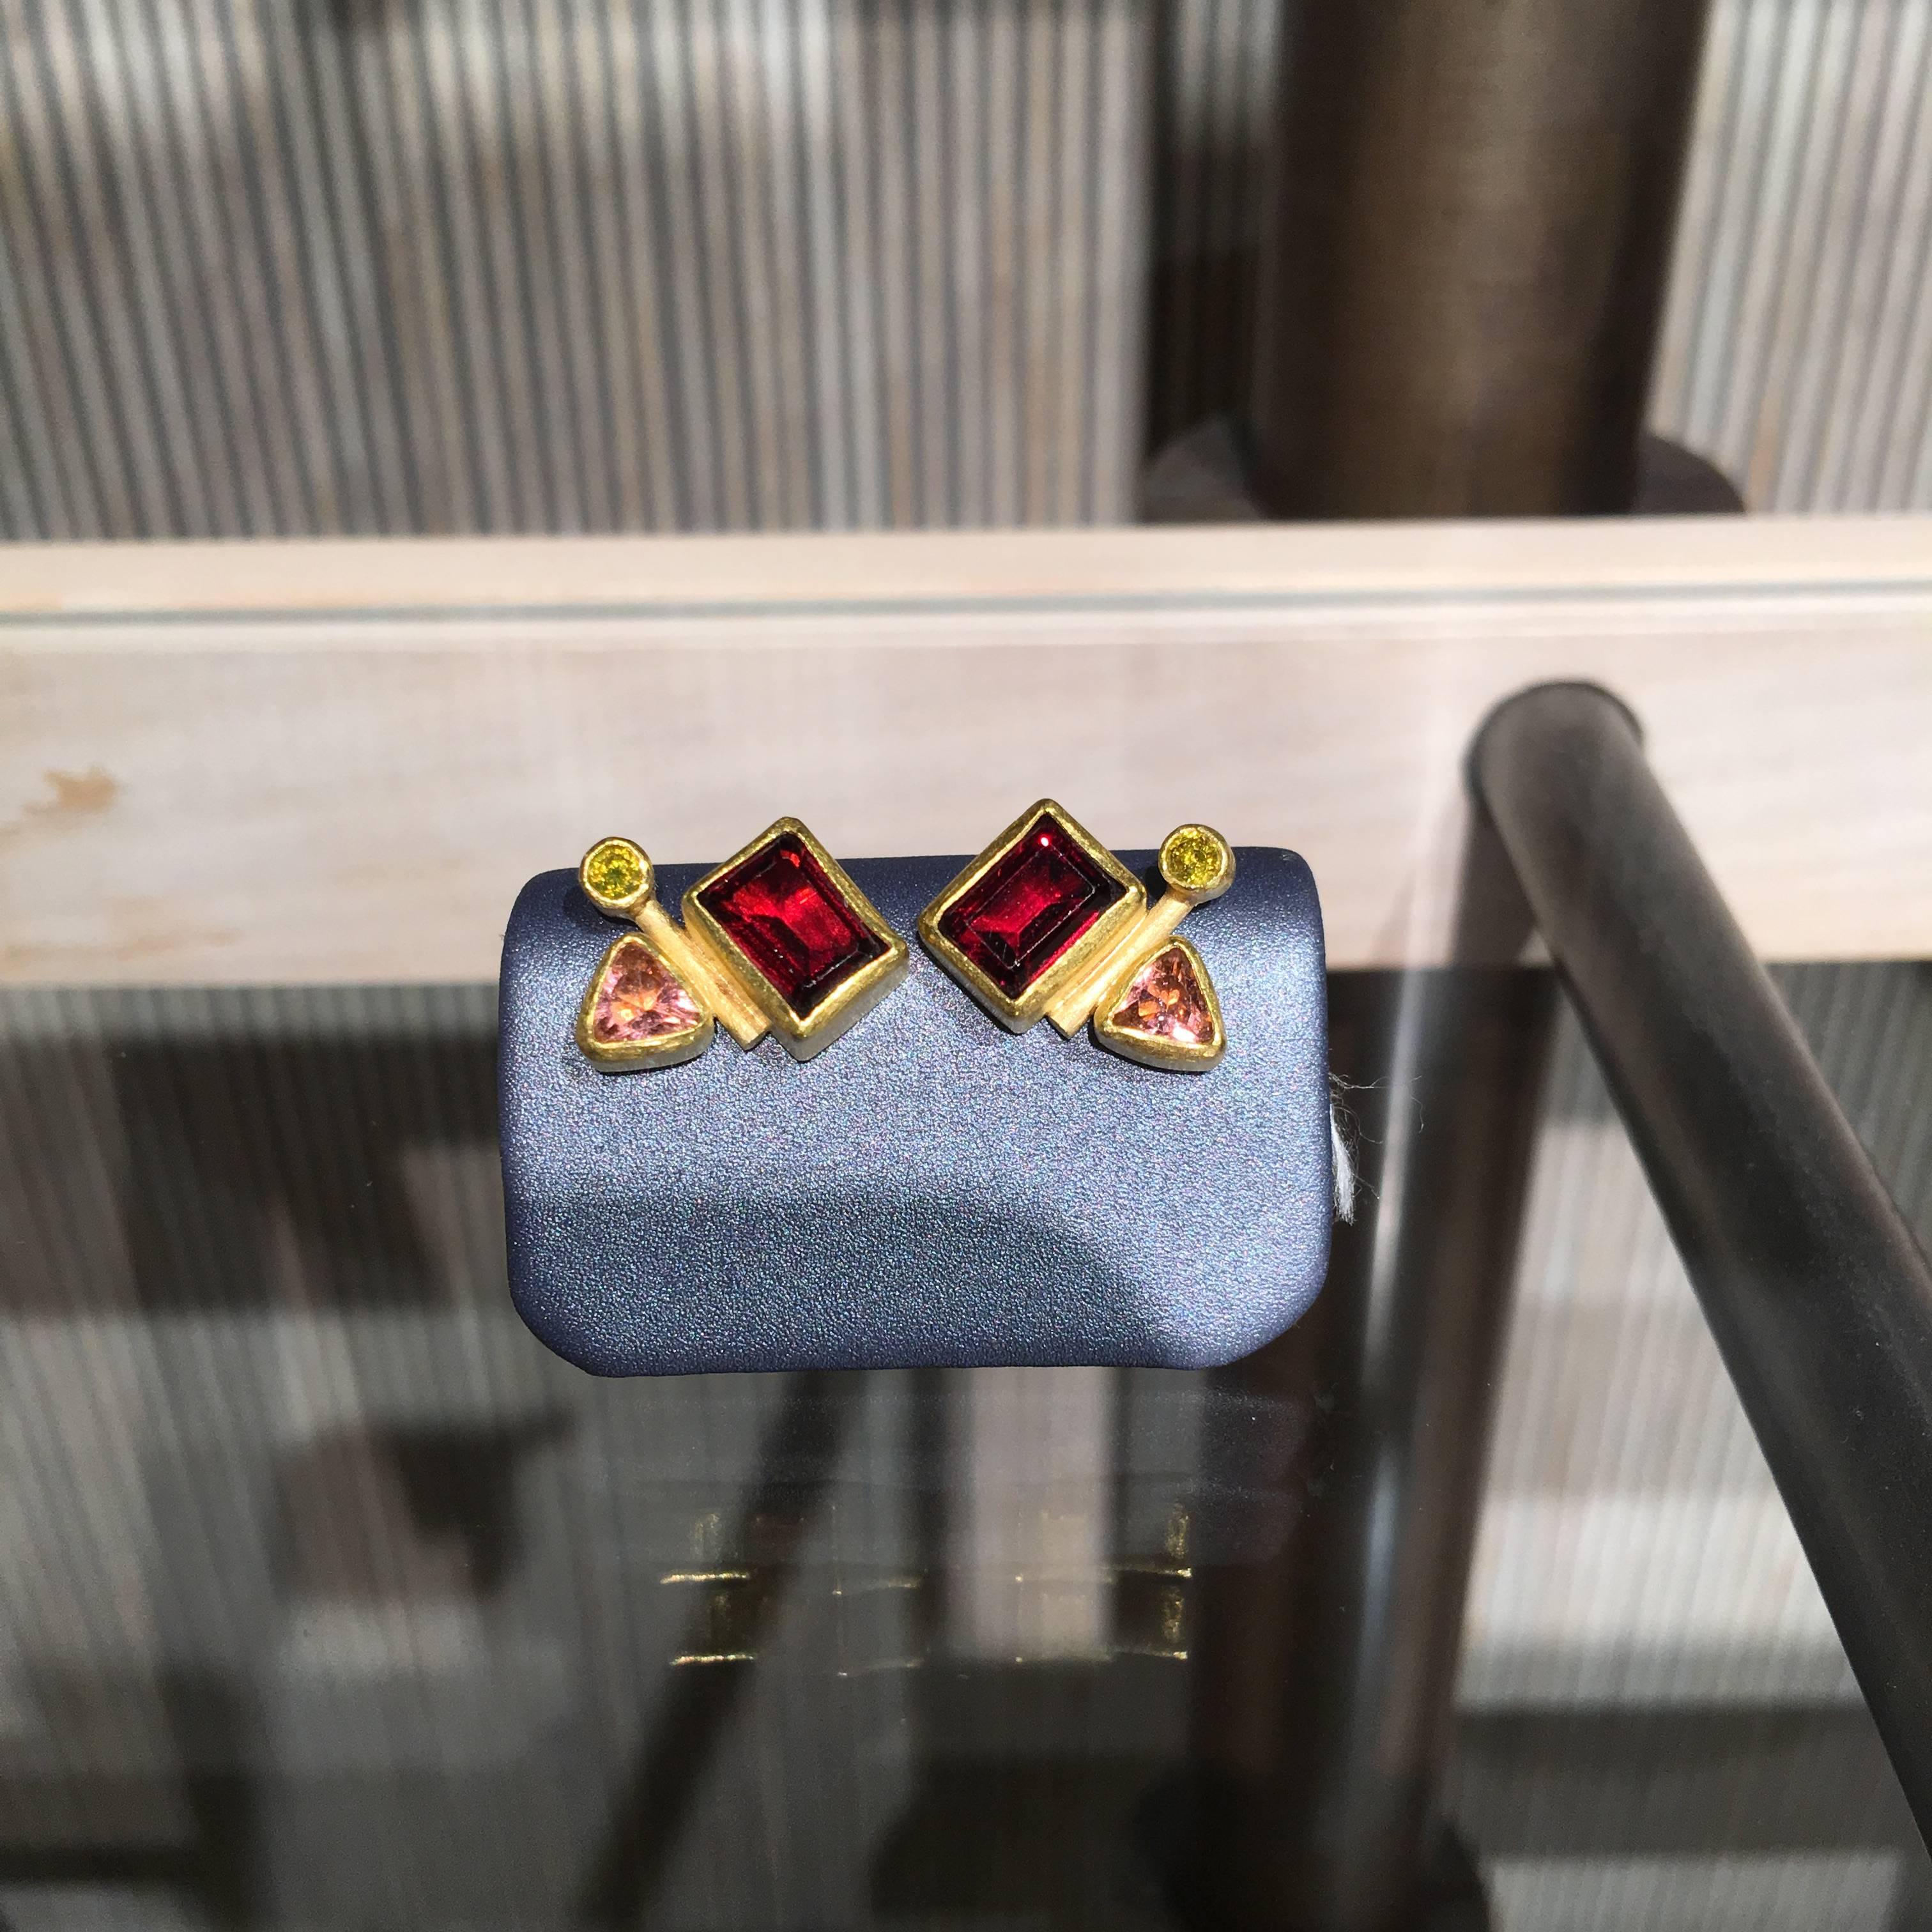 One of a Kind Multigemstone Abstract Stud Earrings handcrafted by jewelry artist Petra Class featuring matched pairs of round brilliant-cut canary diamonds, trillion-cut pink tourmaline, and emerald-cut garnets, all bezel-set in signature-finished